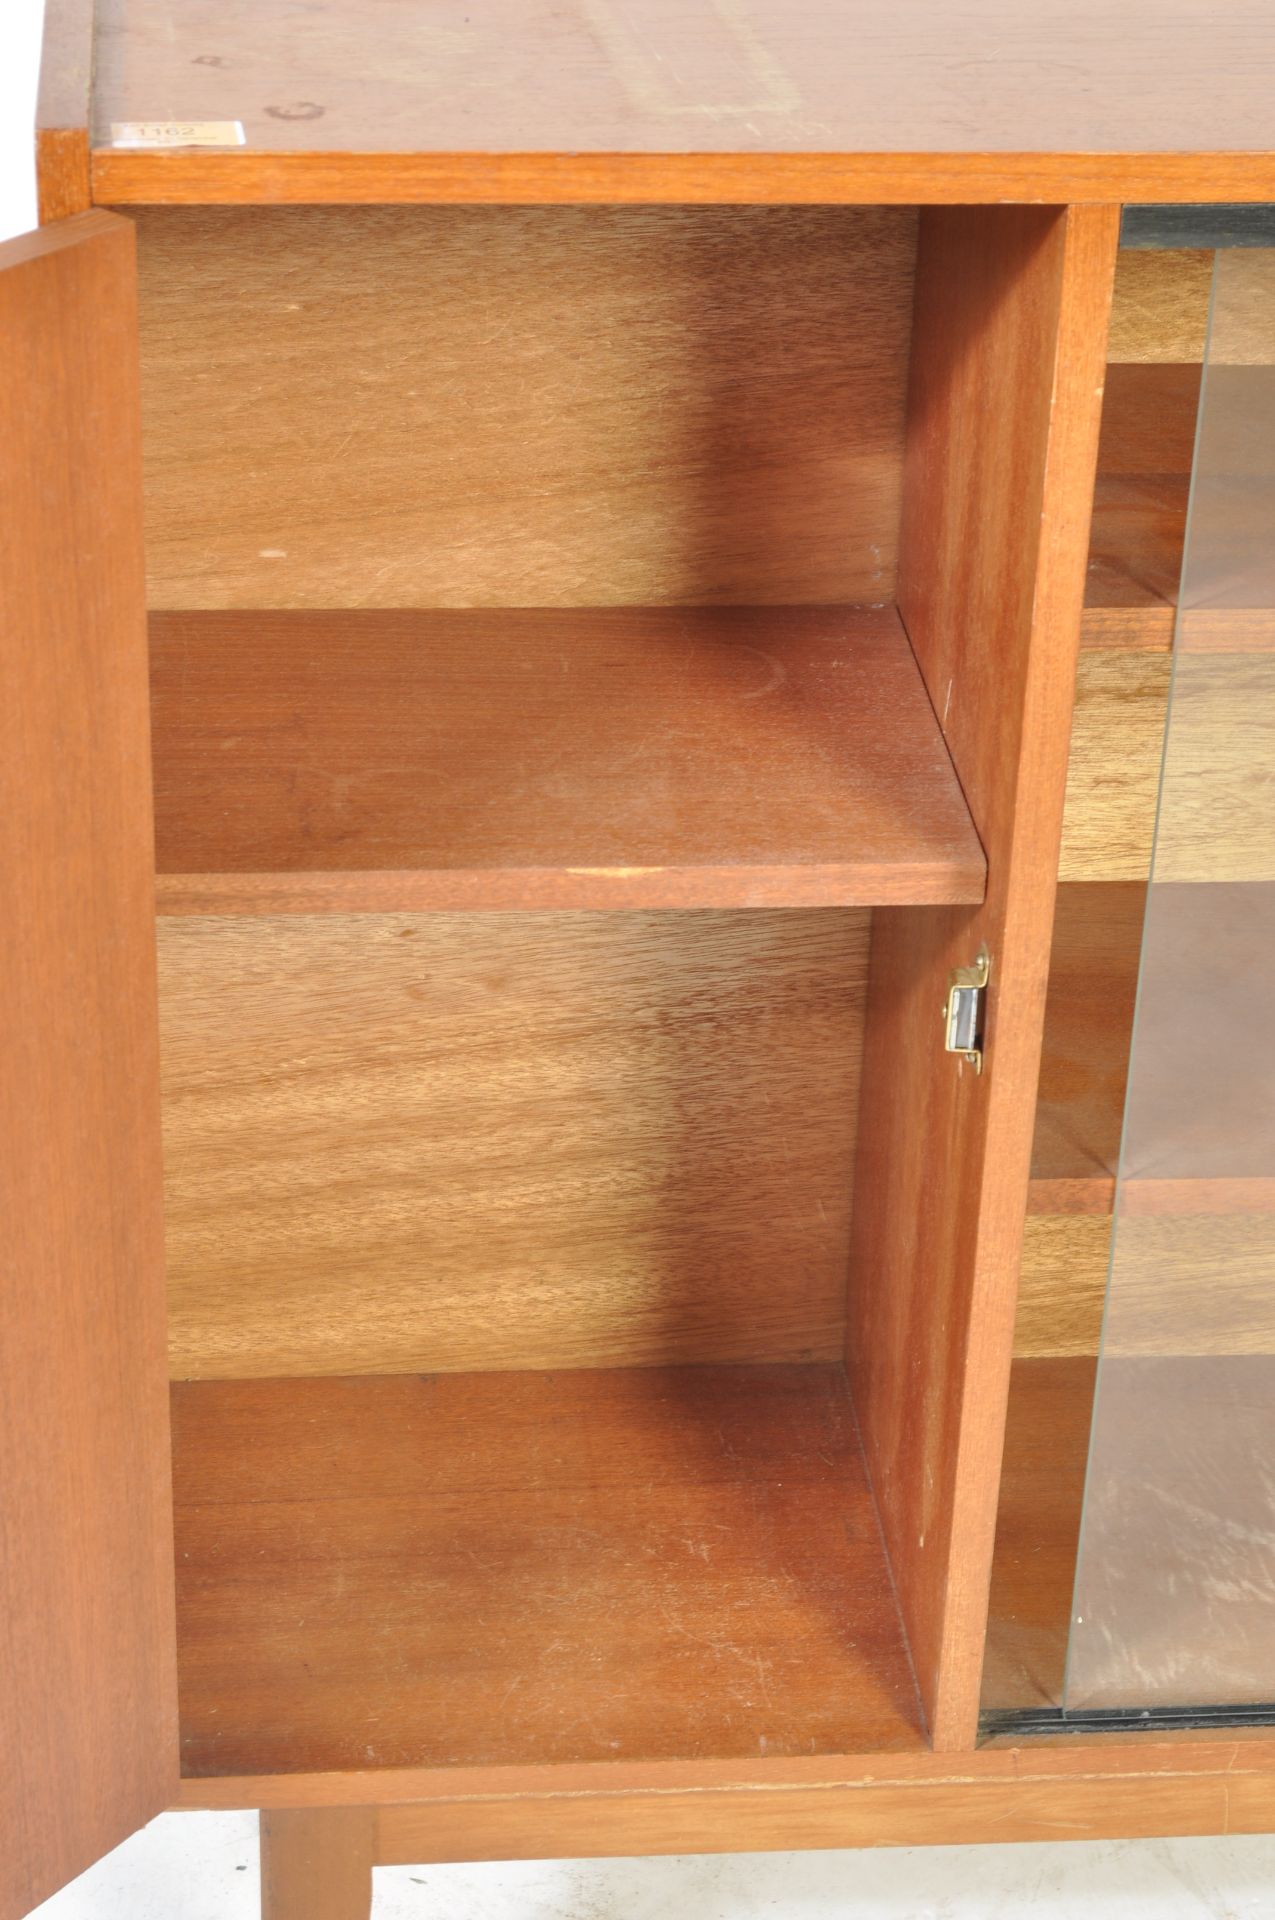 MID 20TH CENTURY TEAK WOOD AND GLASS BOOKCASE / DISPLAY CABINET - Image 6 of 6